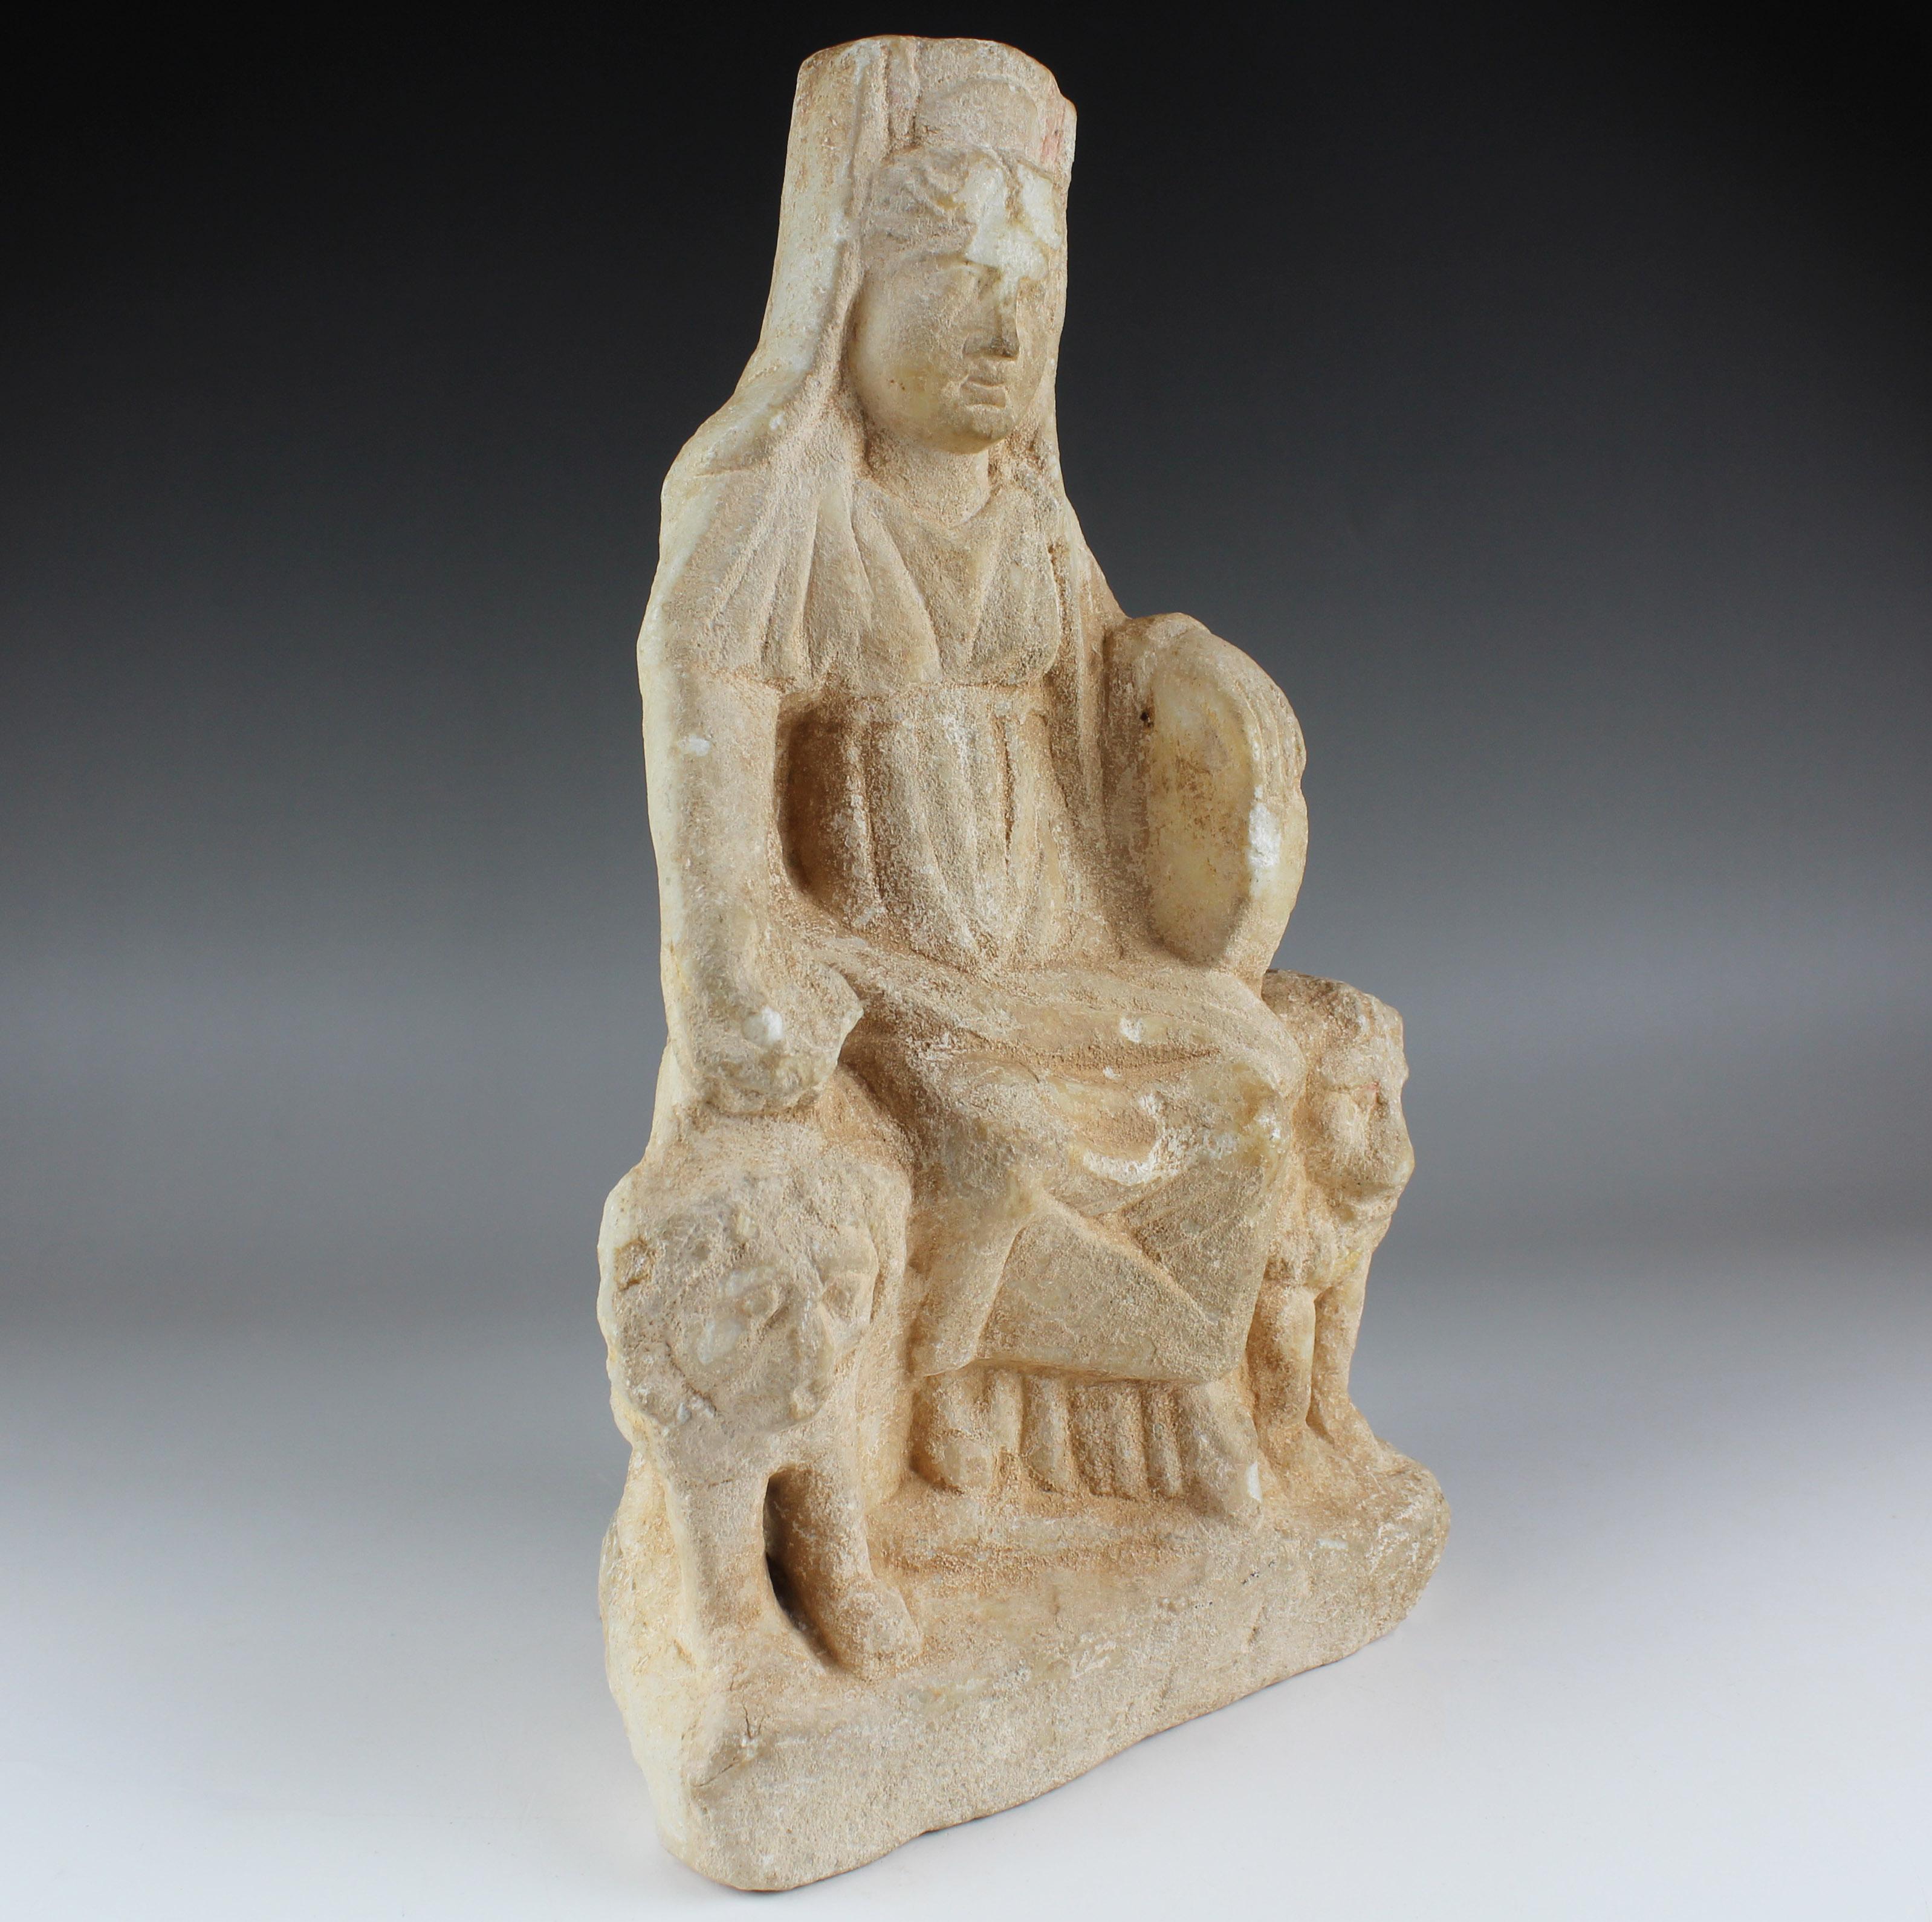 ITEM: Statue of Cybele
MATERIAL: Marble
CULTURE: Roman
PERIOD: 2nd – 3rd Century A.D
DIMENSIONS: 257 mm x 157 mm x 80 mm
CONDITION: Good condition
PROVENANCE: Ex German private collection, Bavarian, E.N., acquired between 1960 – 1990

Comes with